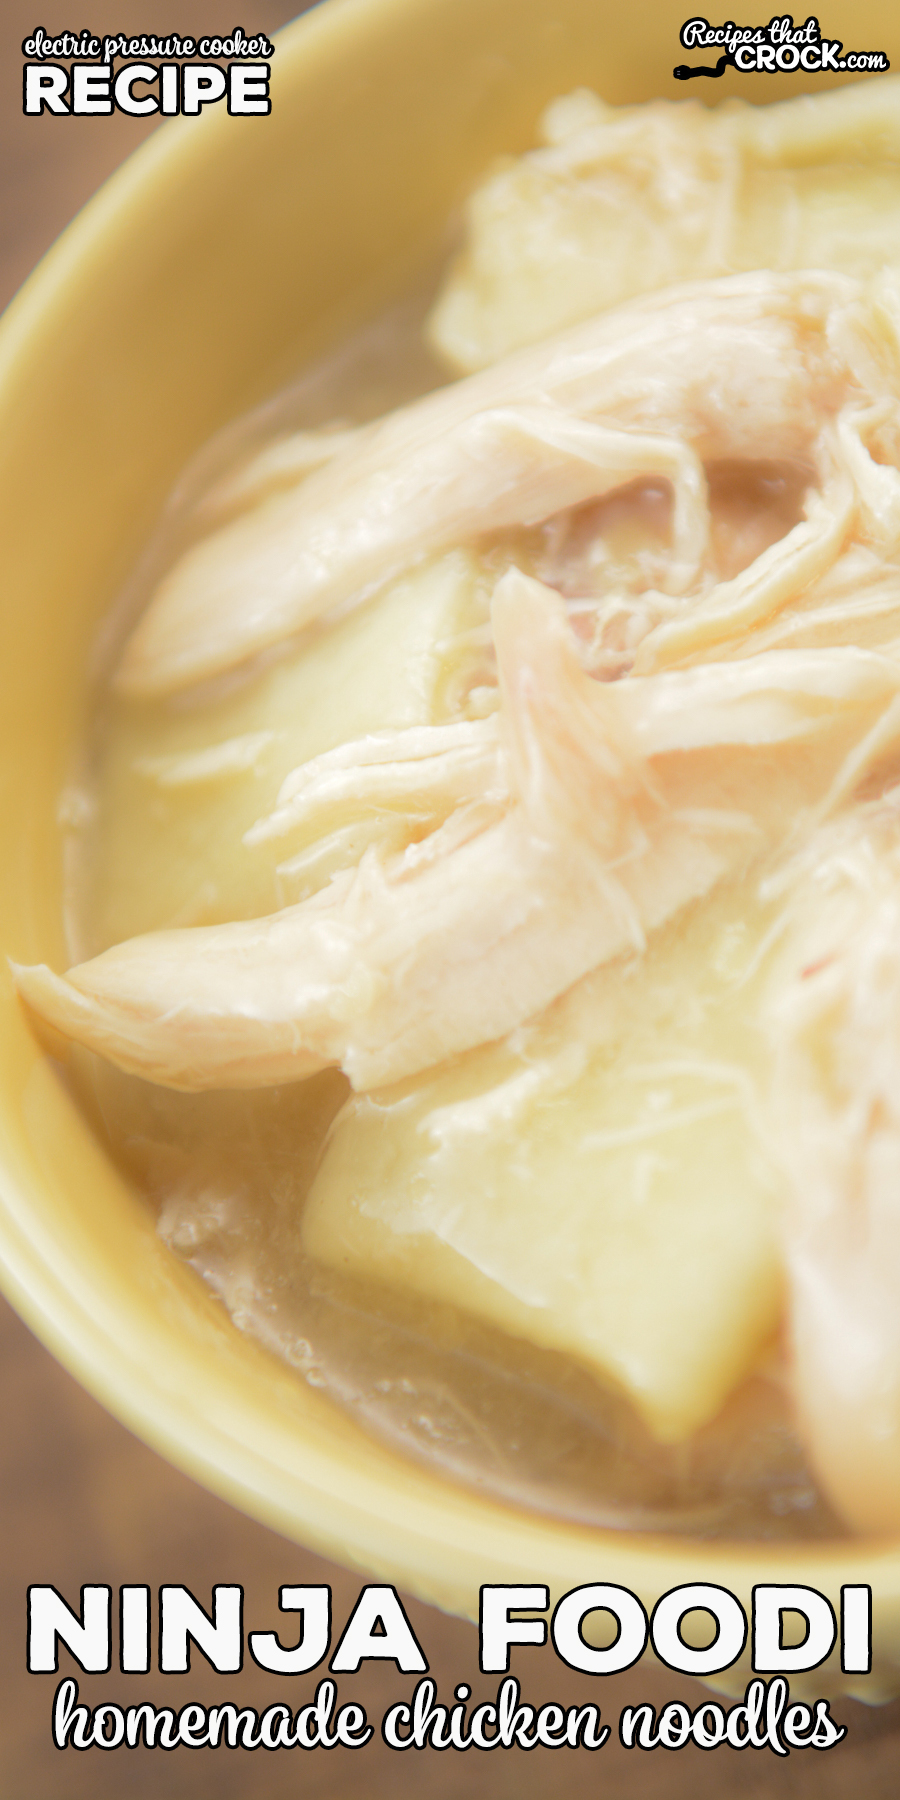 Our Electric Pressure Cooker Homemade Chicken Noodles are an easy way to make the  favorite old fashioned recipe in your Ninja Foodi, Instant Pot or other electric pressure cooker.  Easy made from scratch noodles and tender chicken make this the ultimate comfort food. via @recipescrock